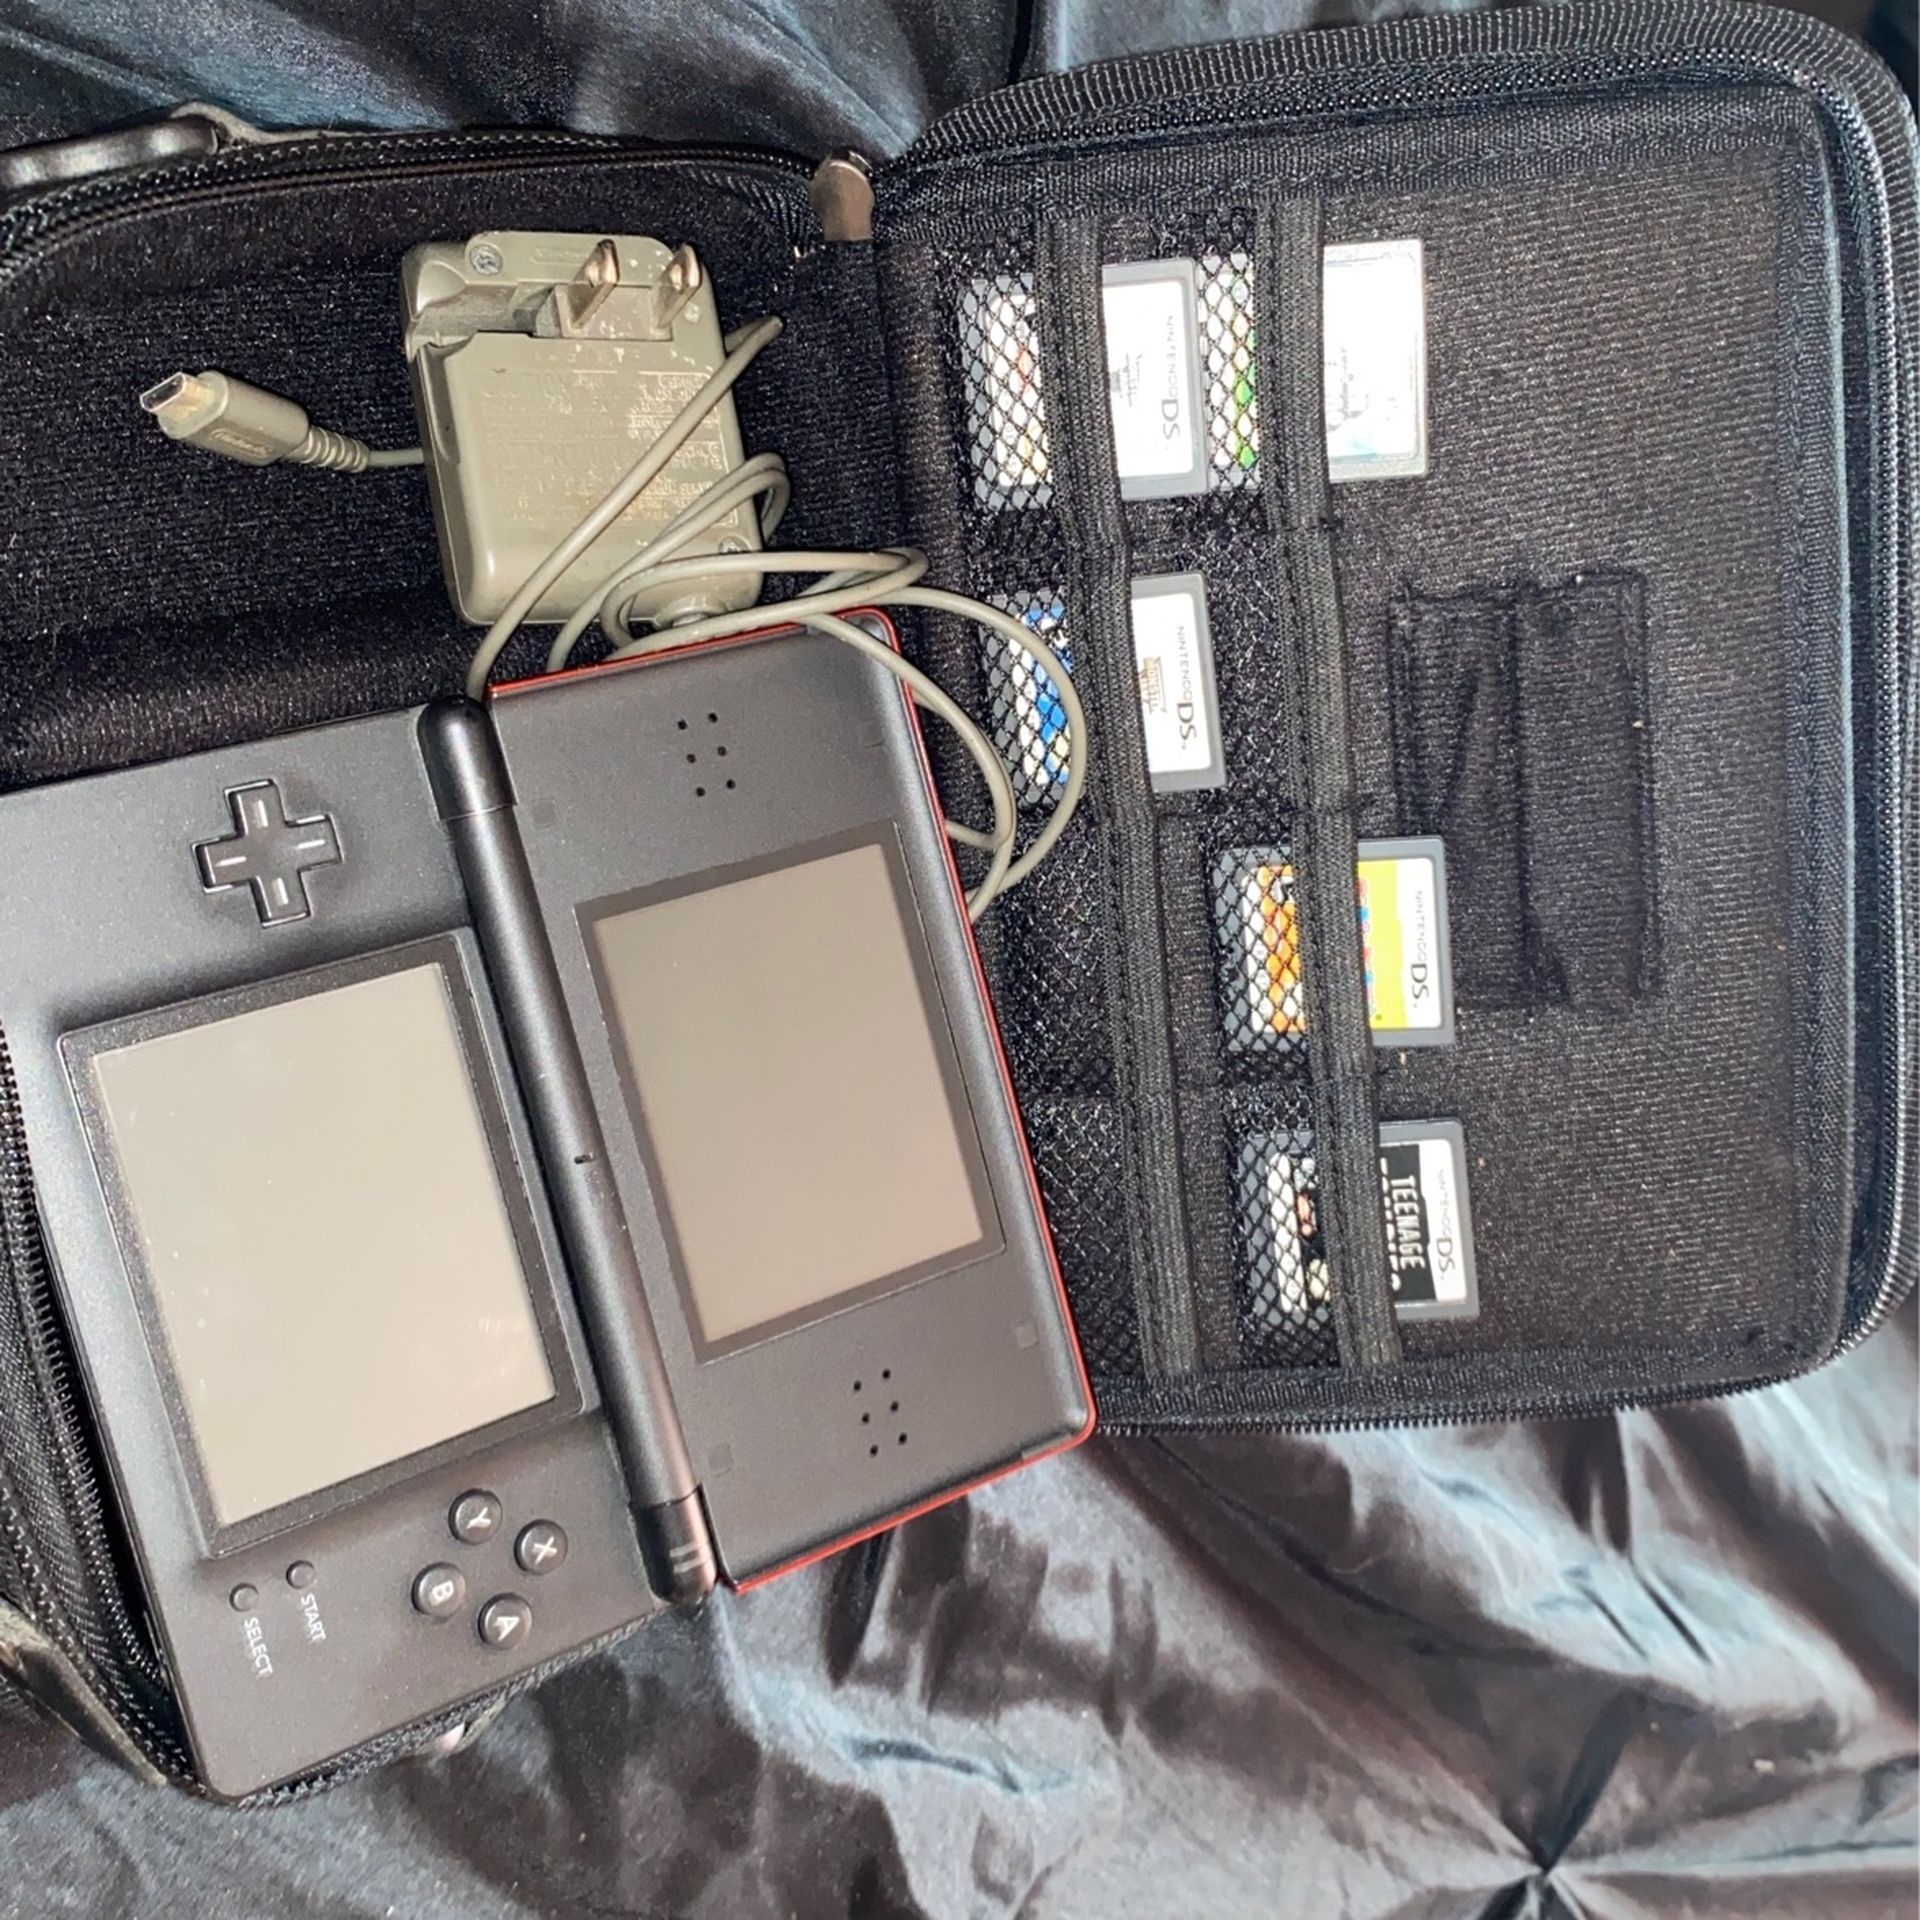 Nintendo DS lite with games